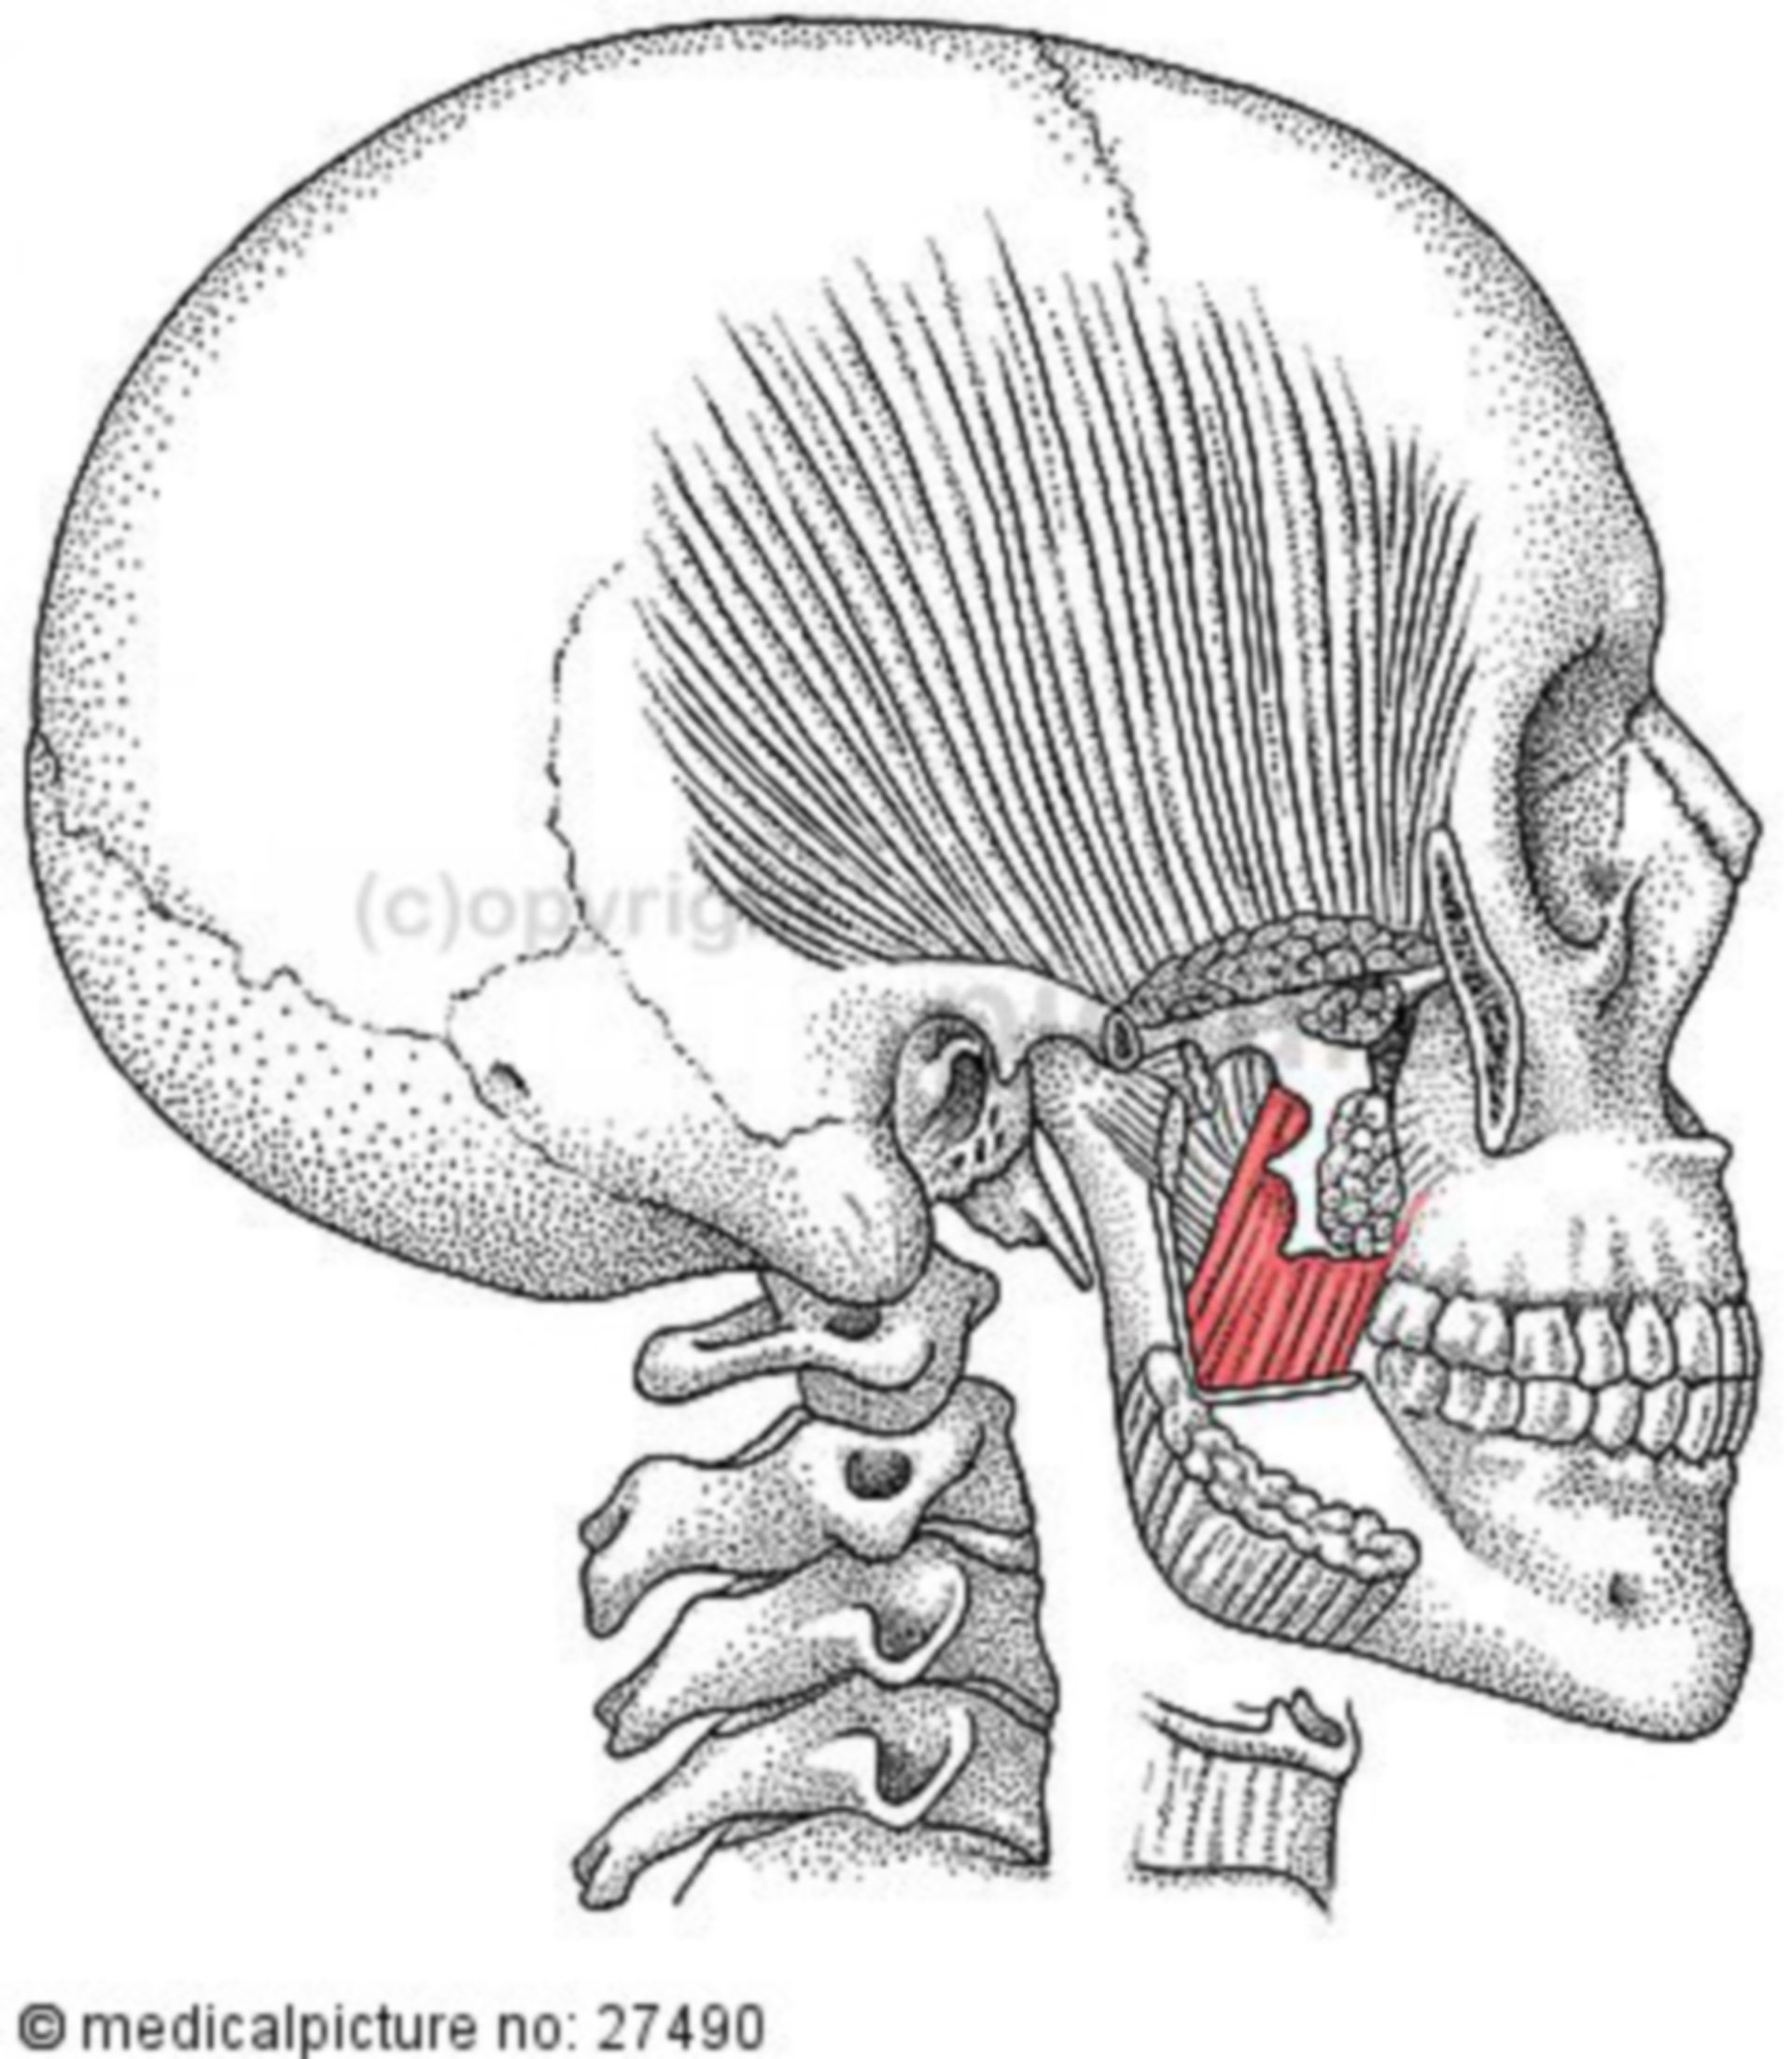 Medial pterygoid muscle, mastication muscles